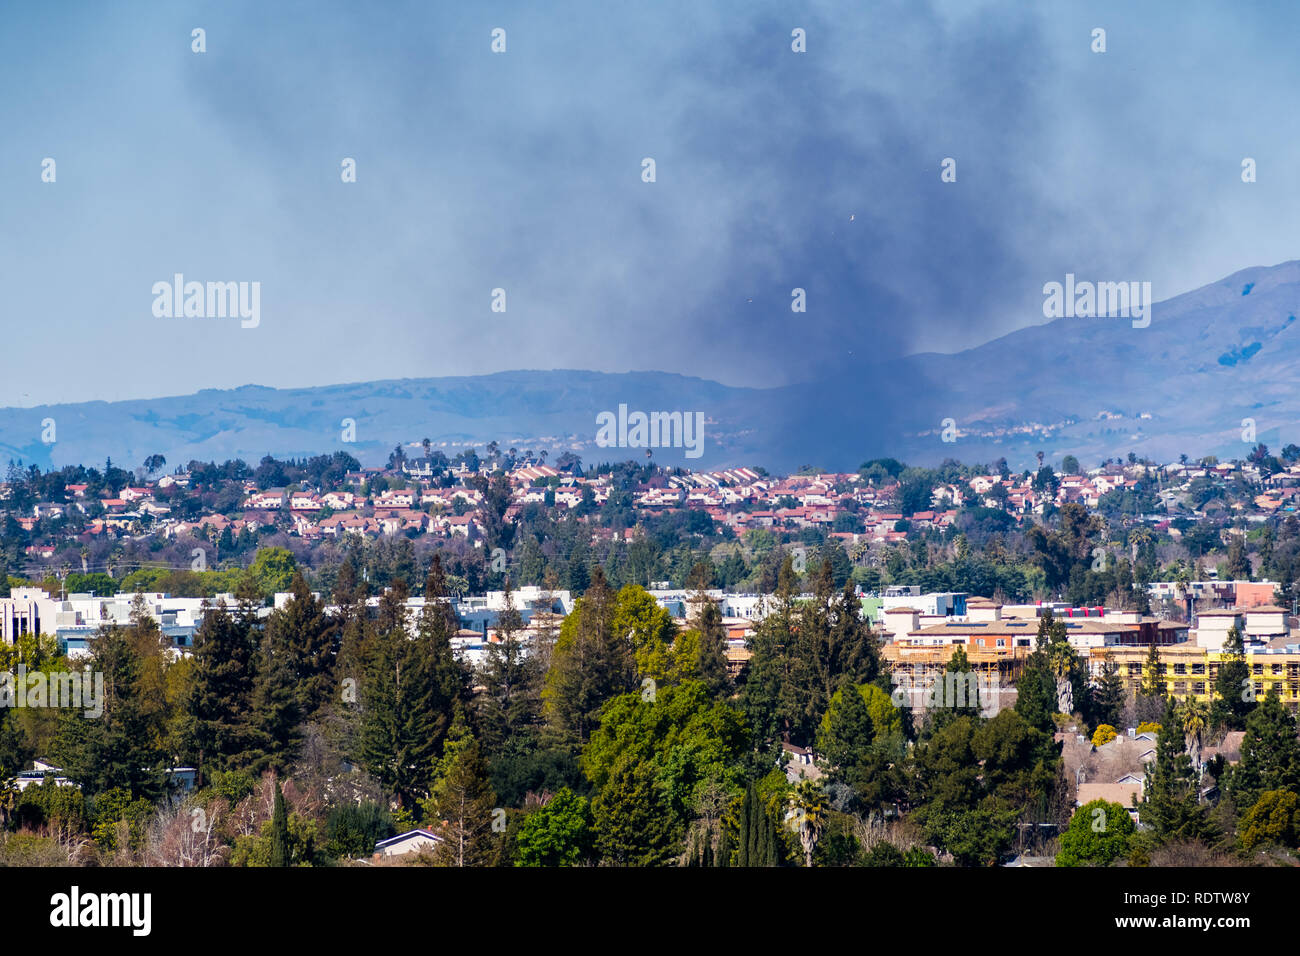 Smoke from a fire rising over residential areas in south San Jose, San Francisco bay area, California Stock Photo